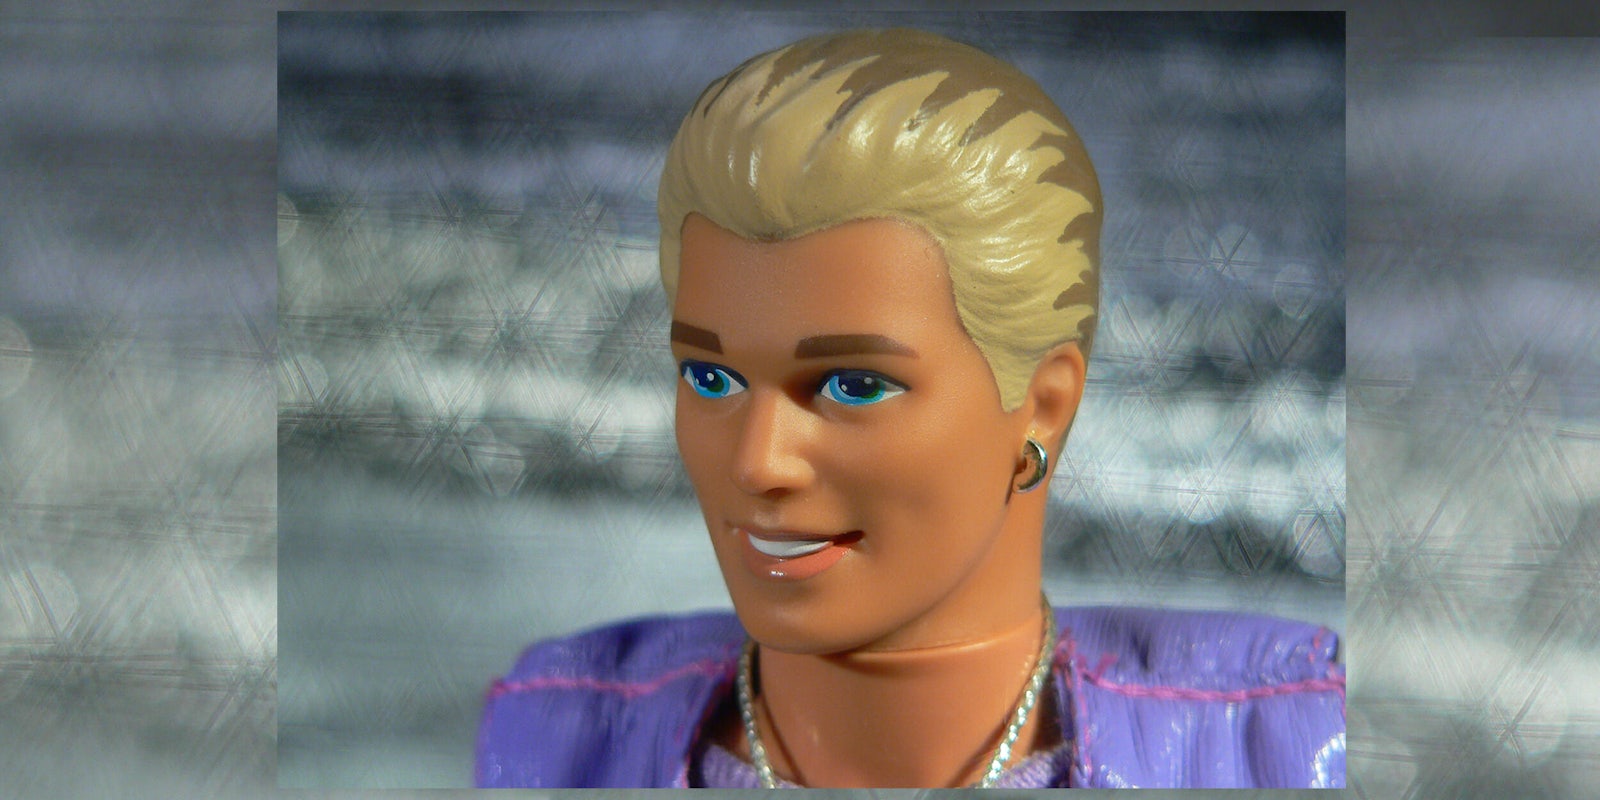 Ken Doll: 20 Fabulous Facts About Barbie's Iconic Partner